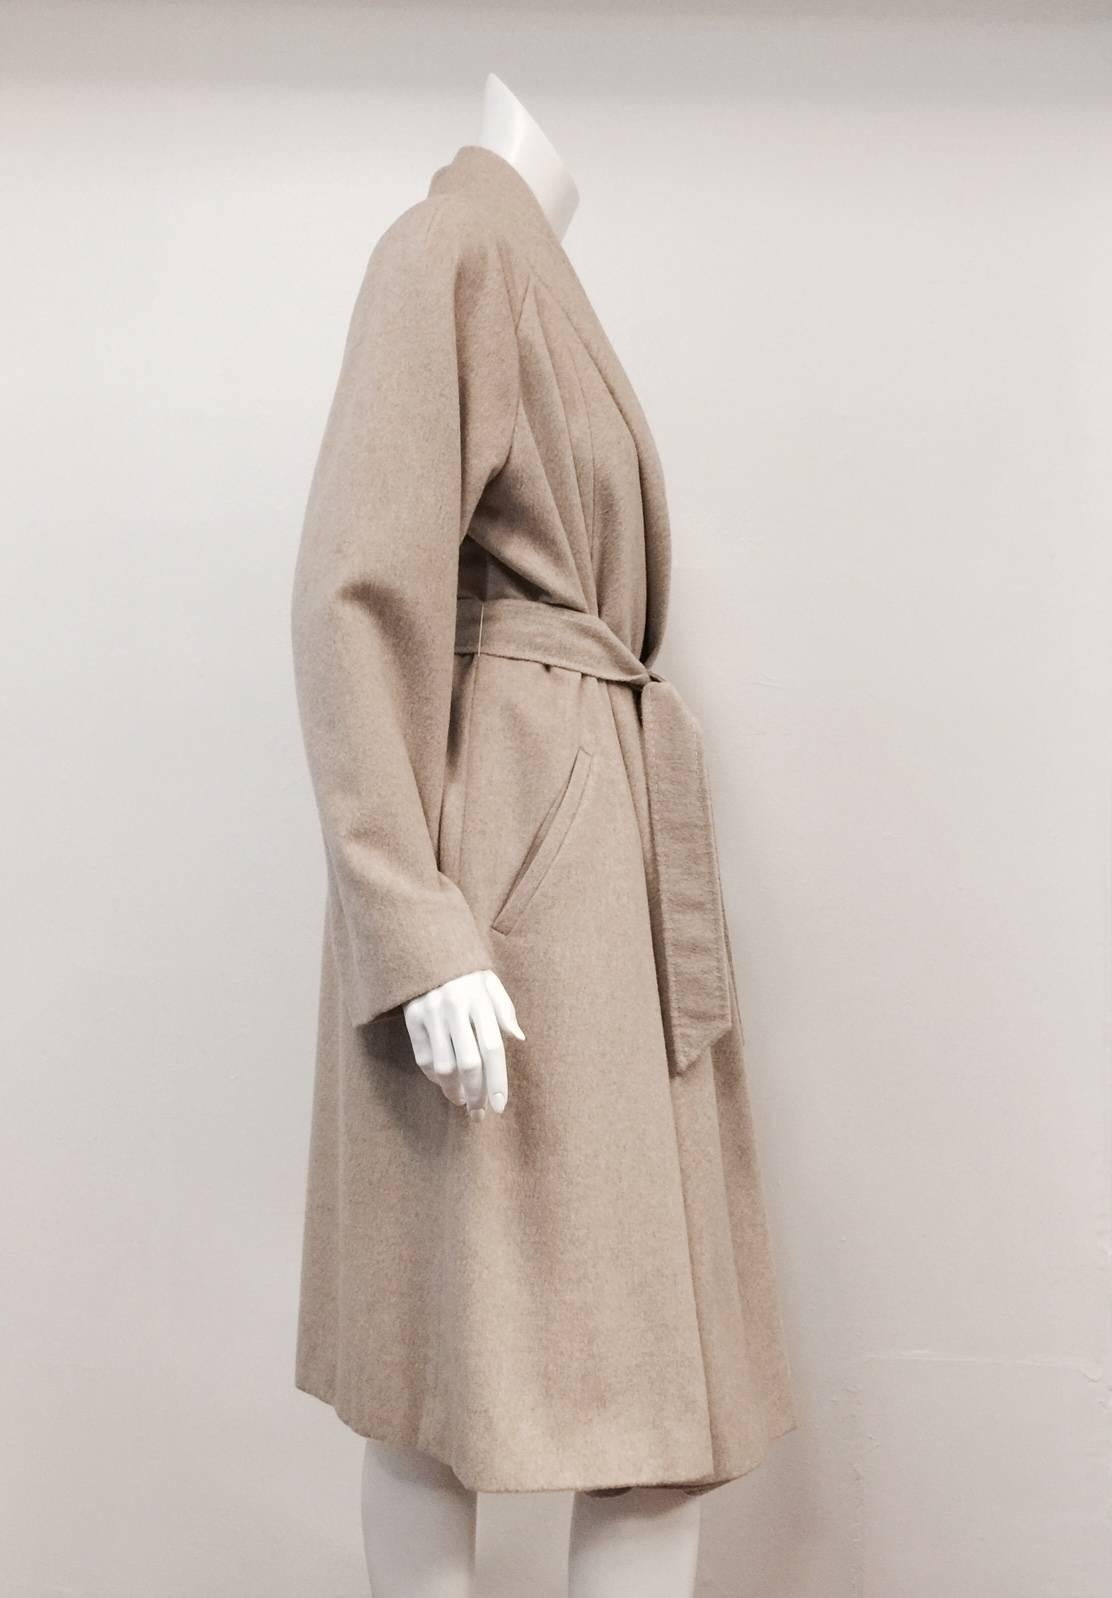 Max Mara Belted Coat  is pure luxury defined!  Features supremely soft cashmere in timeless tan.  Raglan sleeves, two slanted welt pockets, shawl collar and pick-stitched belt complete this classic look.  Fully lined in viscose with oversized